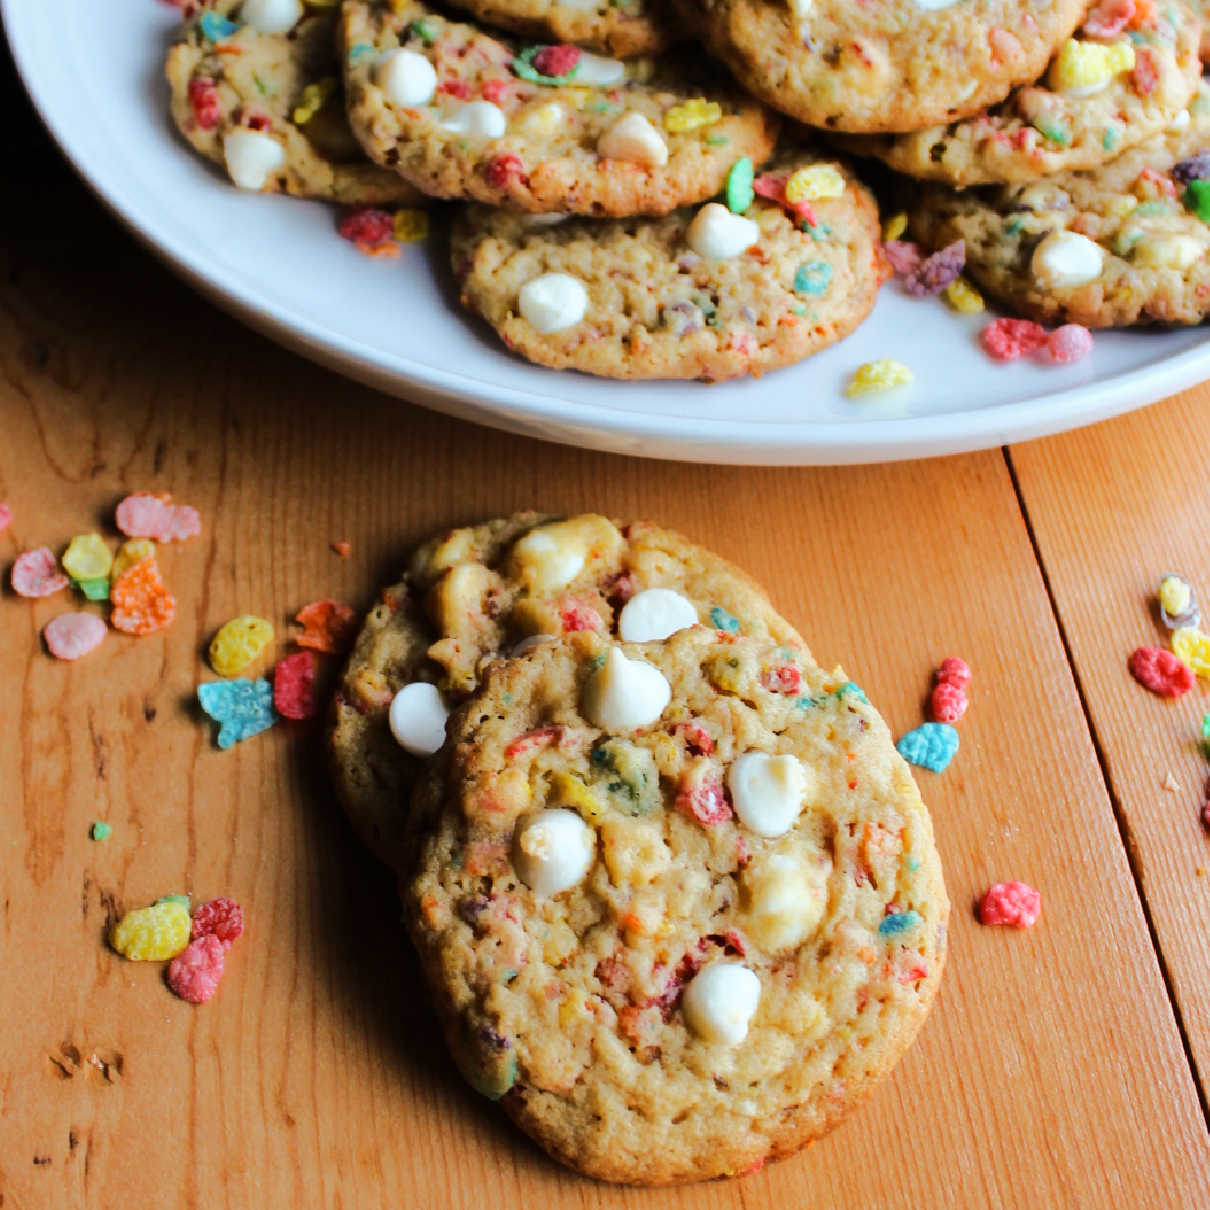 Colorful fruity pebble cookies with white chips.